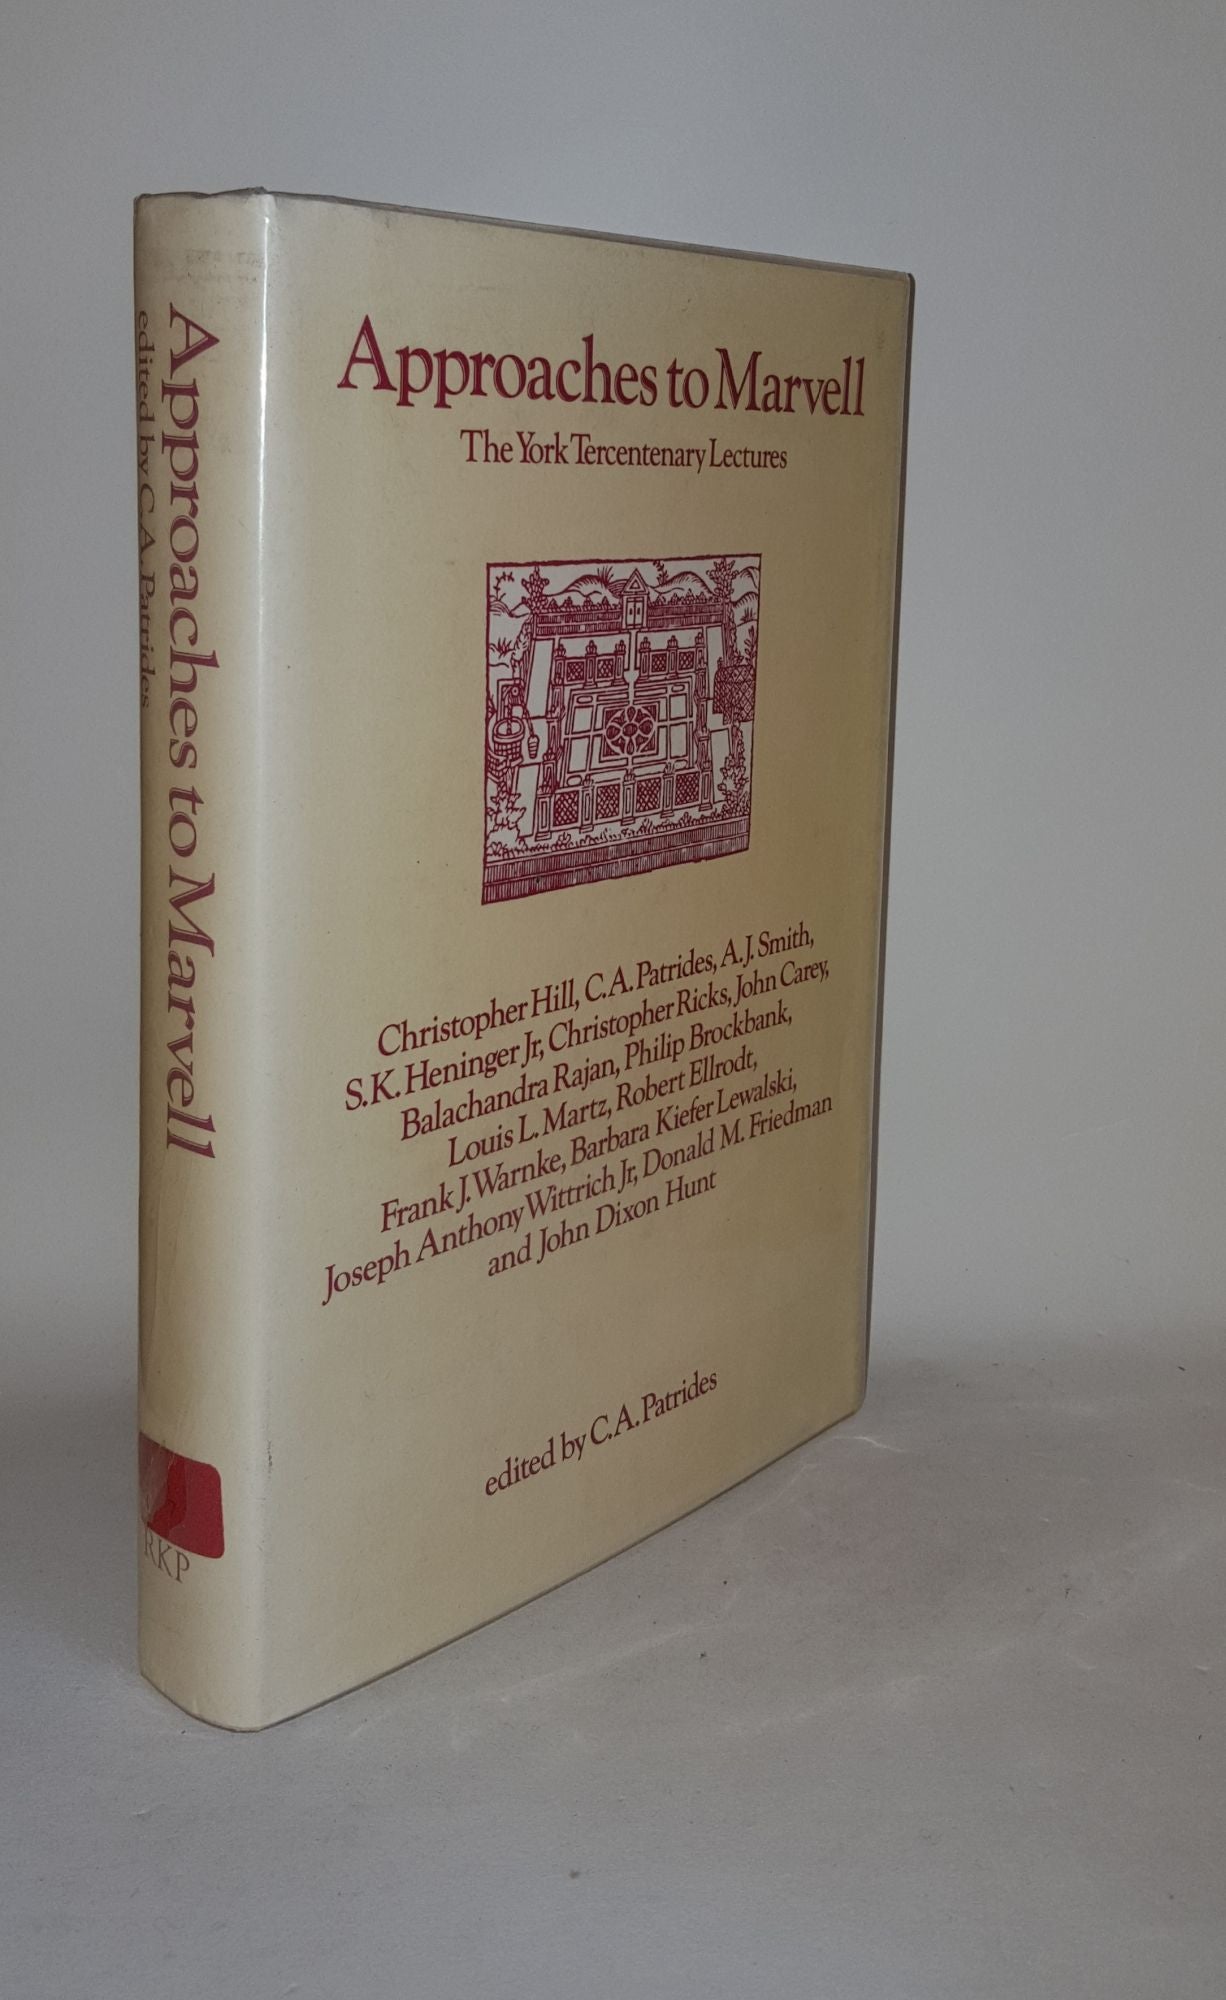 PATRIDES C.A. - Approaches to Marvell the York Tercentenary Lectures